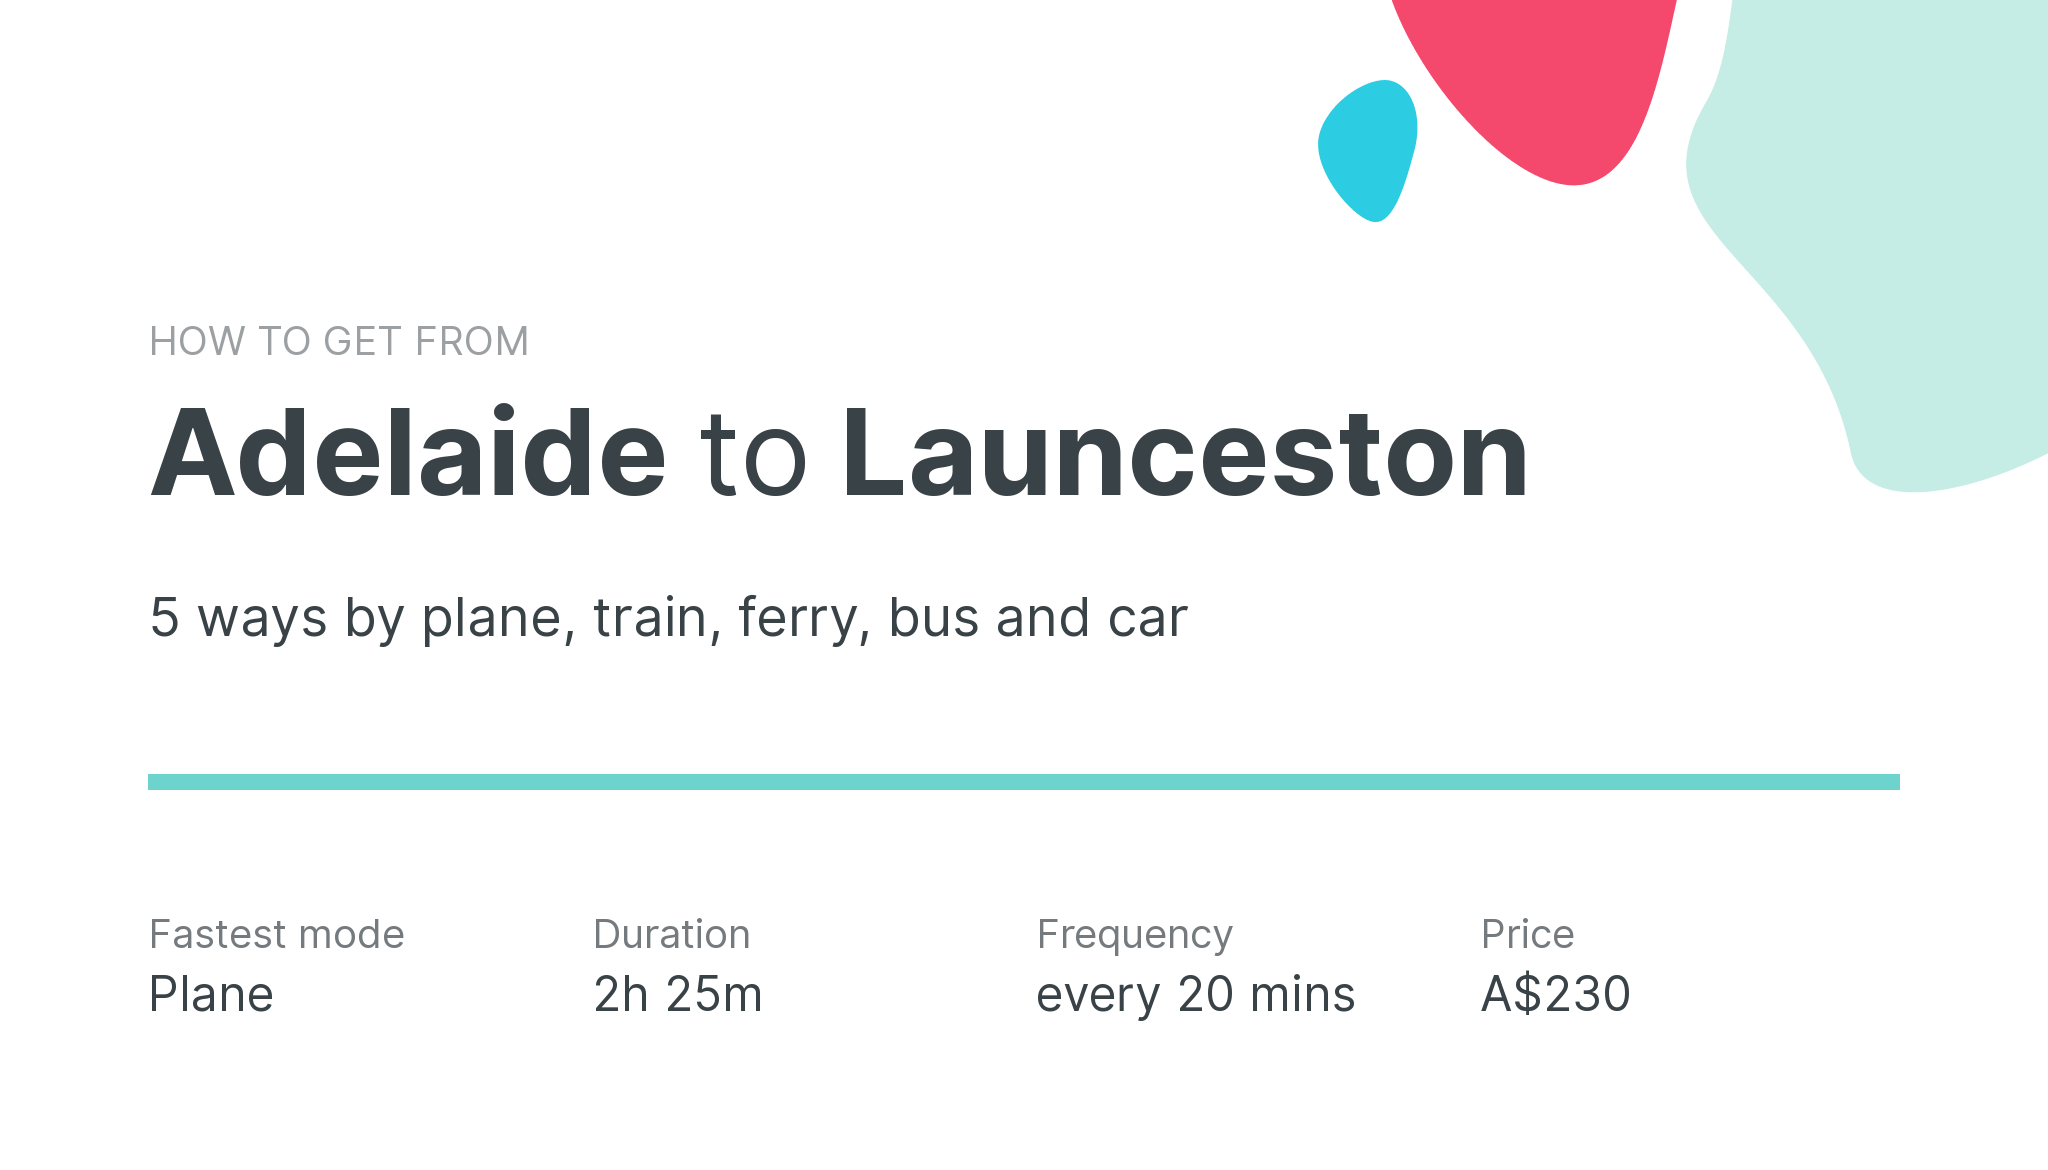 How do I get from Adelaide to Launceston